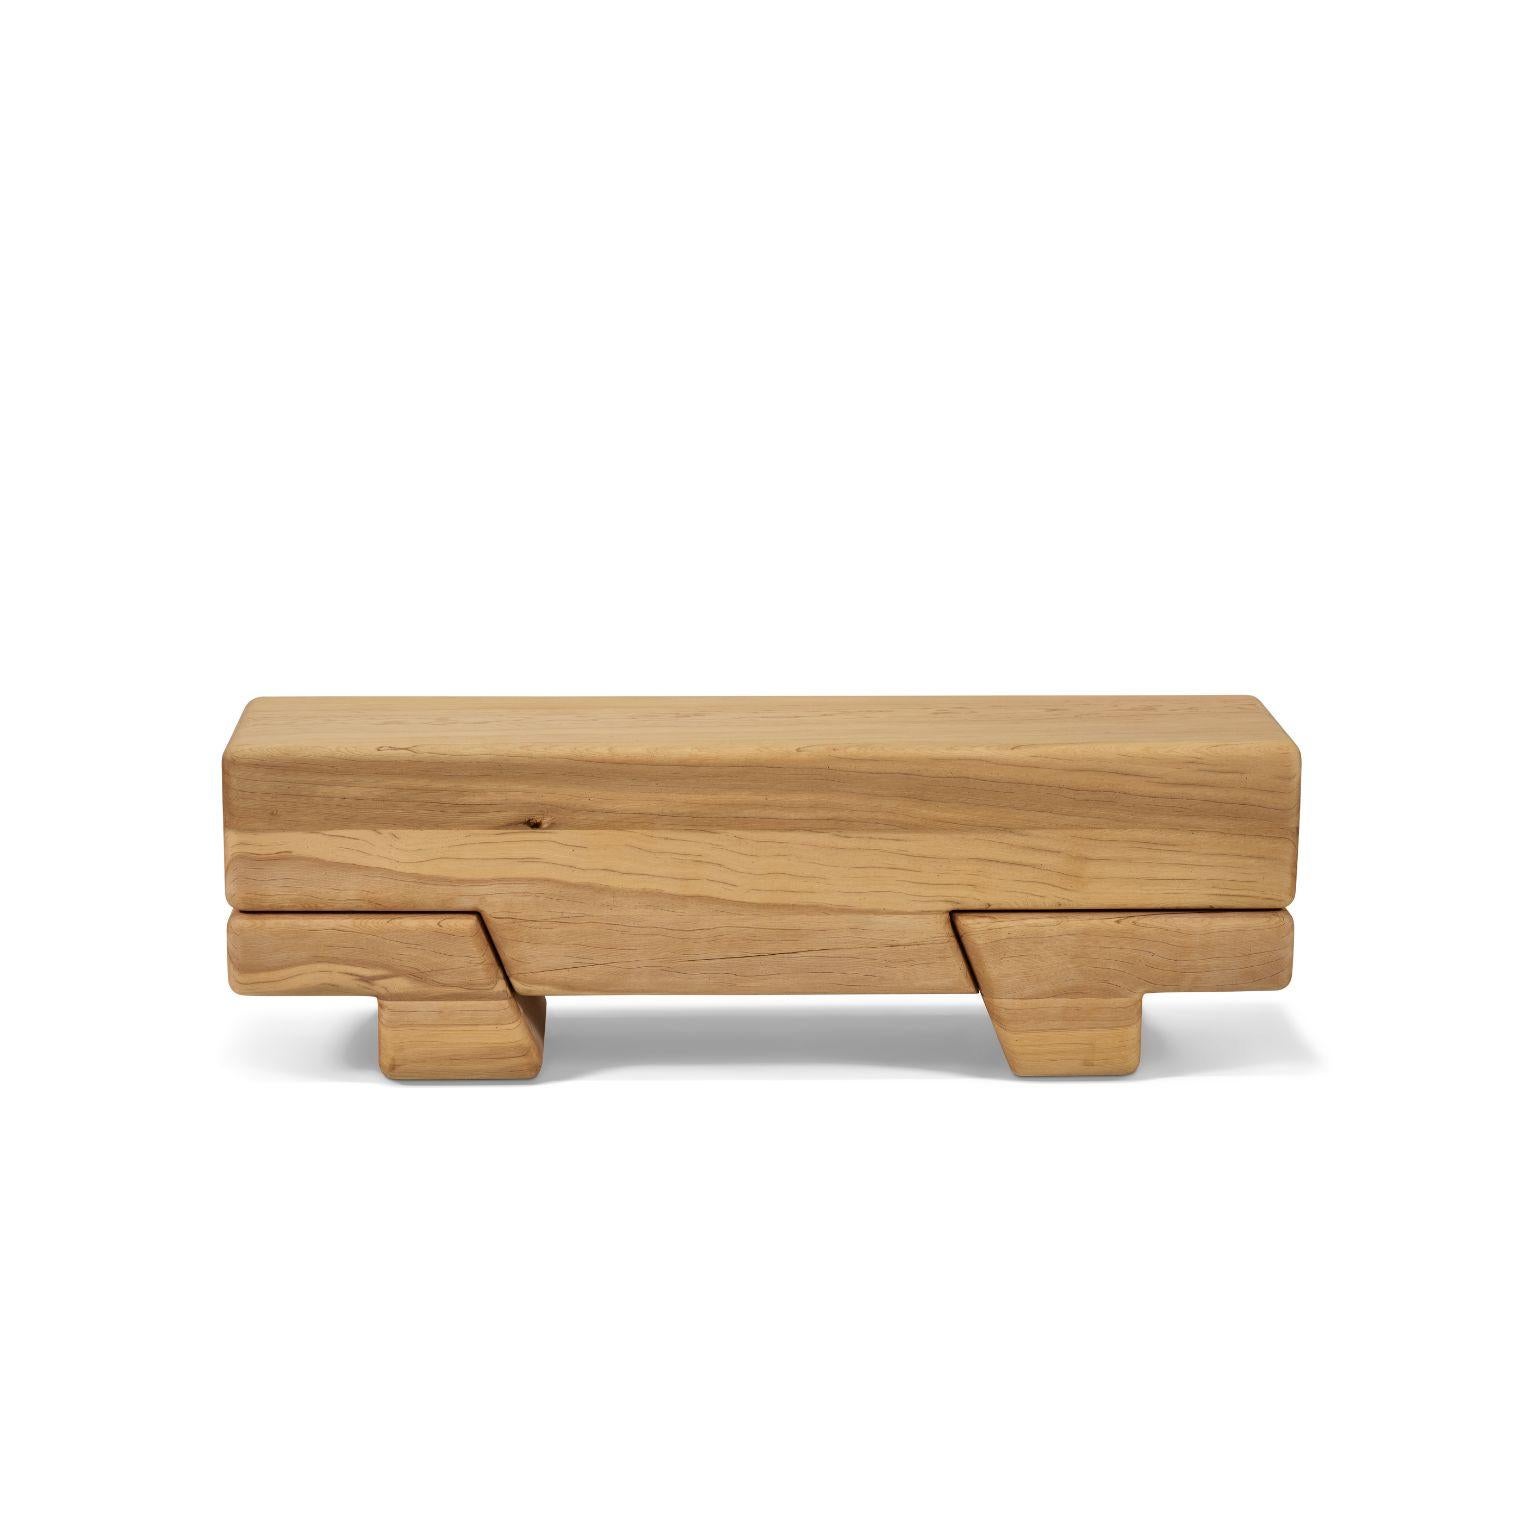 Aromatique Cedre Laminated bench by Contemporary Ecowood
Dimensions: W 120 x D 29 x H 39 cm
Materials: Cedre
Finishing: Monocoat Wood Oil

Contemporary Ecowood’s story began in a craft workshop in 2009. Our wood passion made us focus on fallen